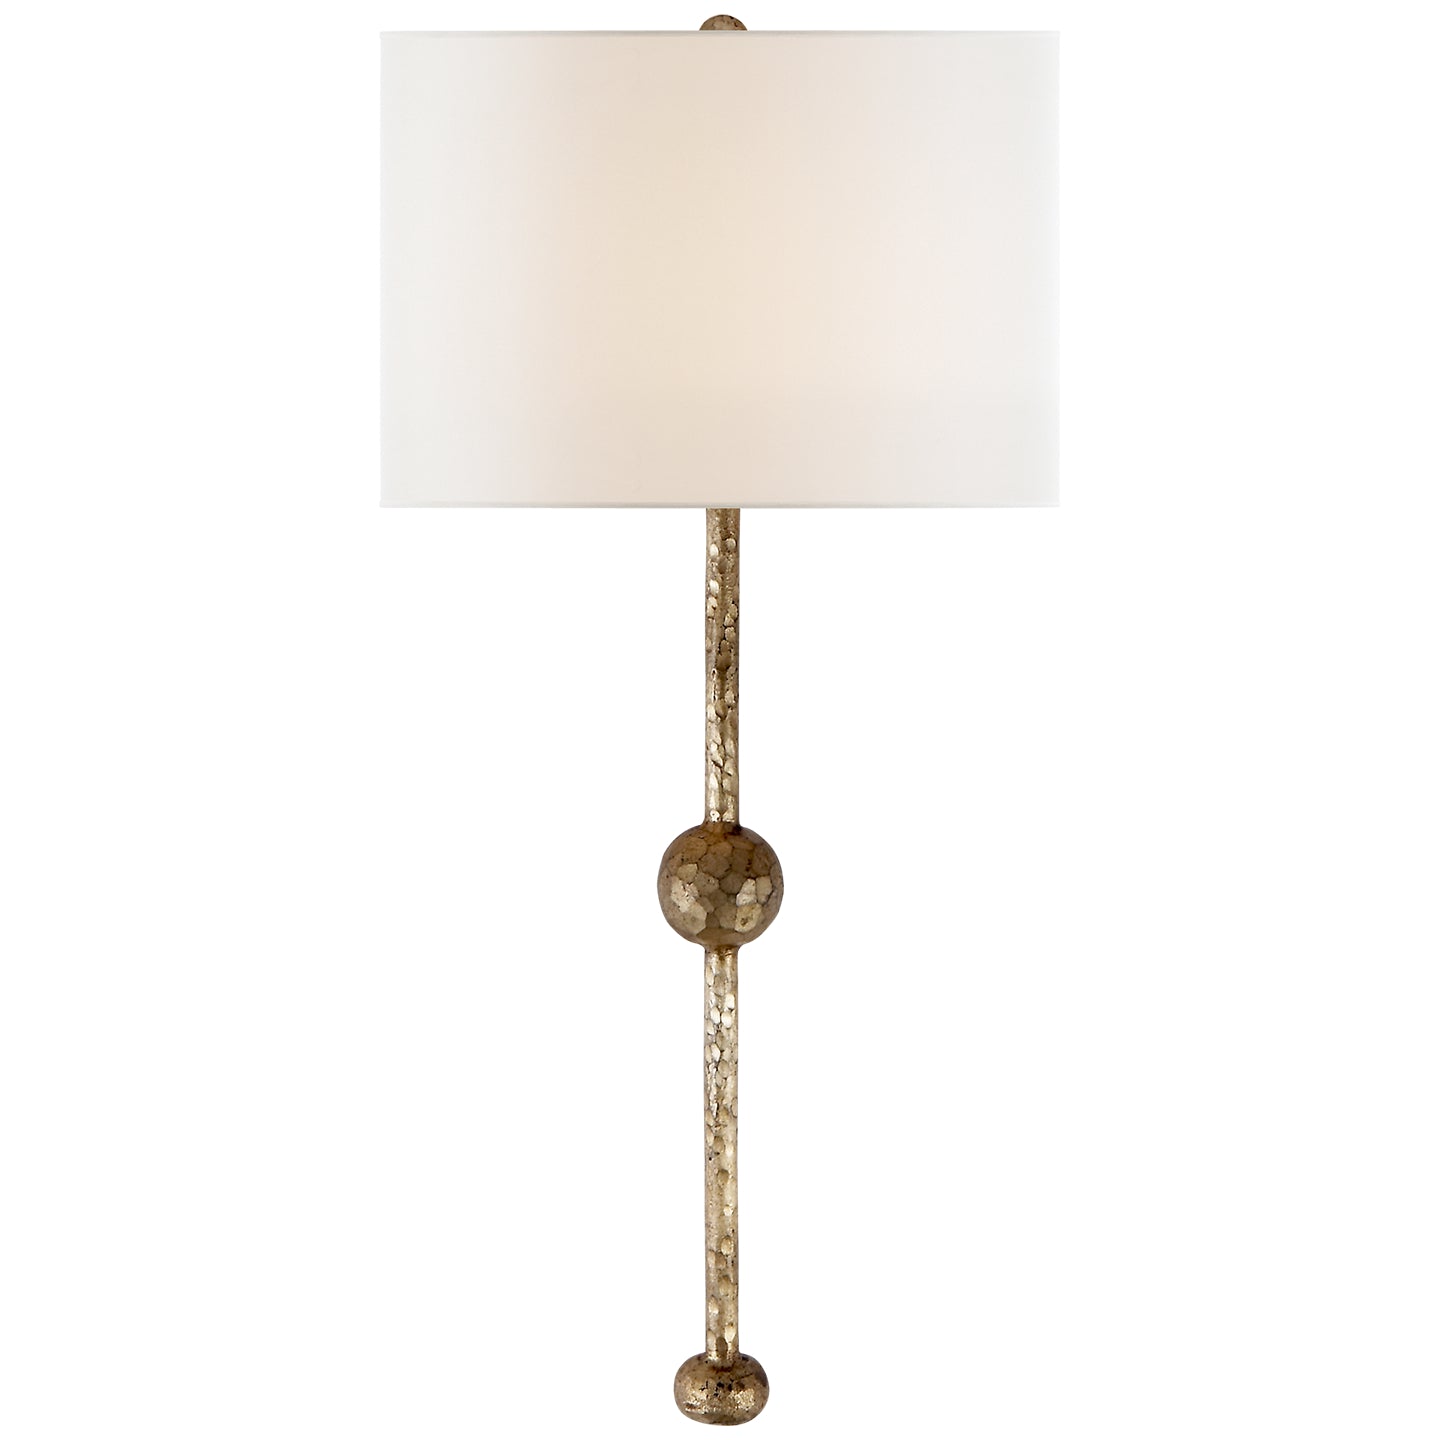 Load image into Gallery viewer, Visual Comfort Signature - SK 2263GI-L - One Light Wall Sconce - Carey - Gilded Iron
